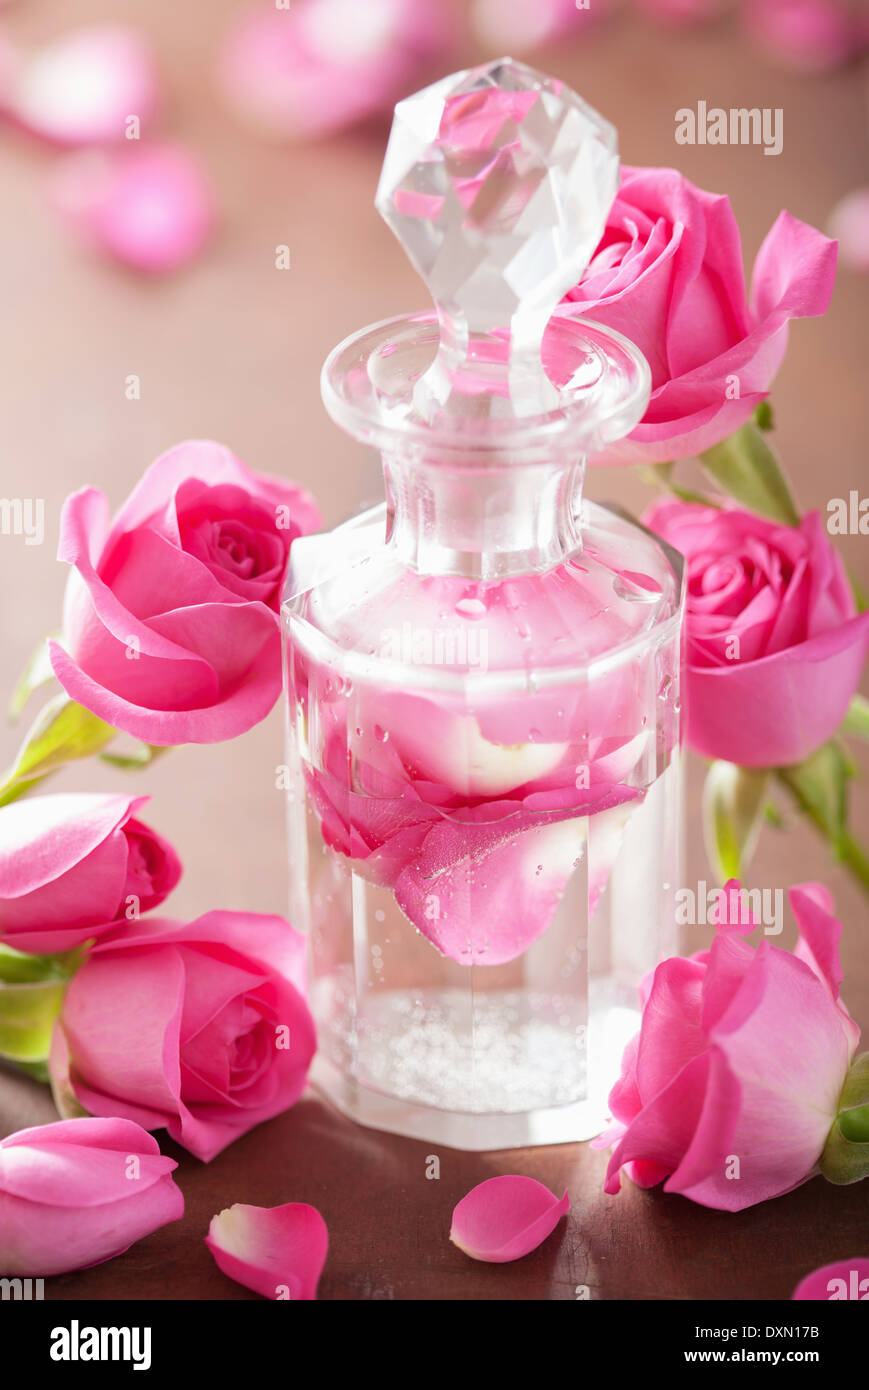 DIY Perfume Vase: Upcycle the Bottle and Display Your Bouquet